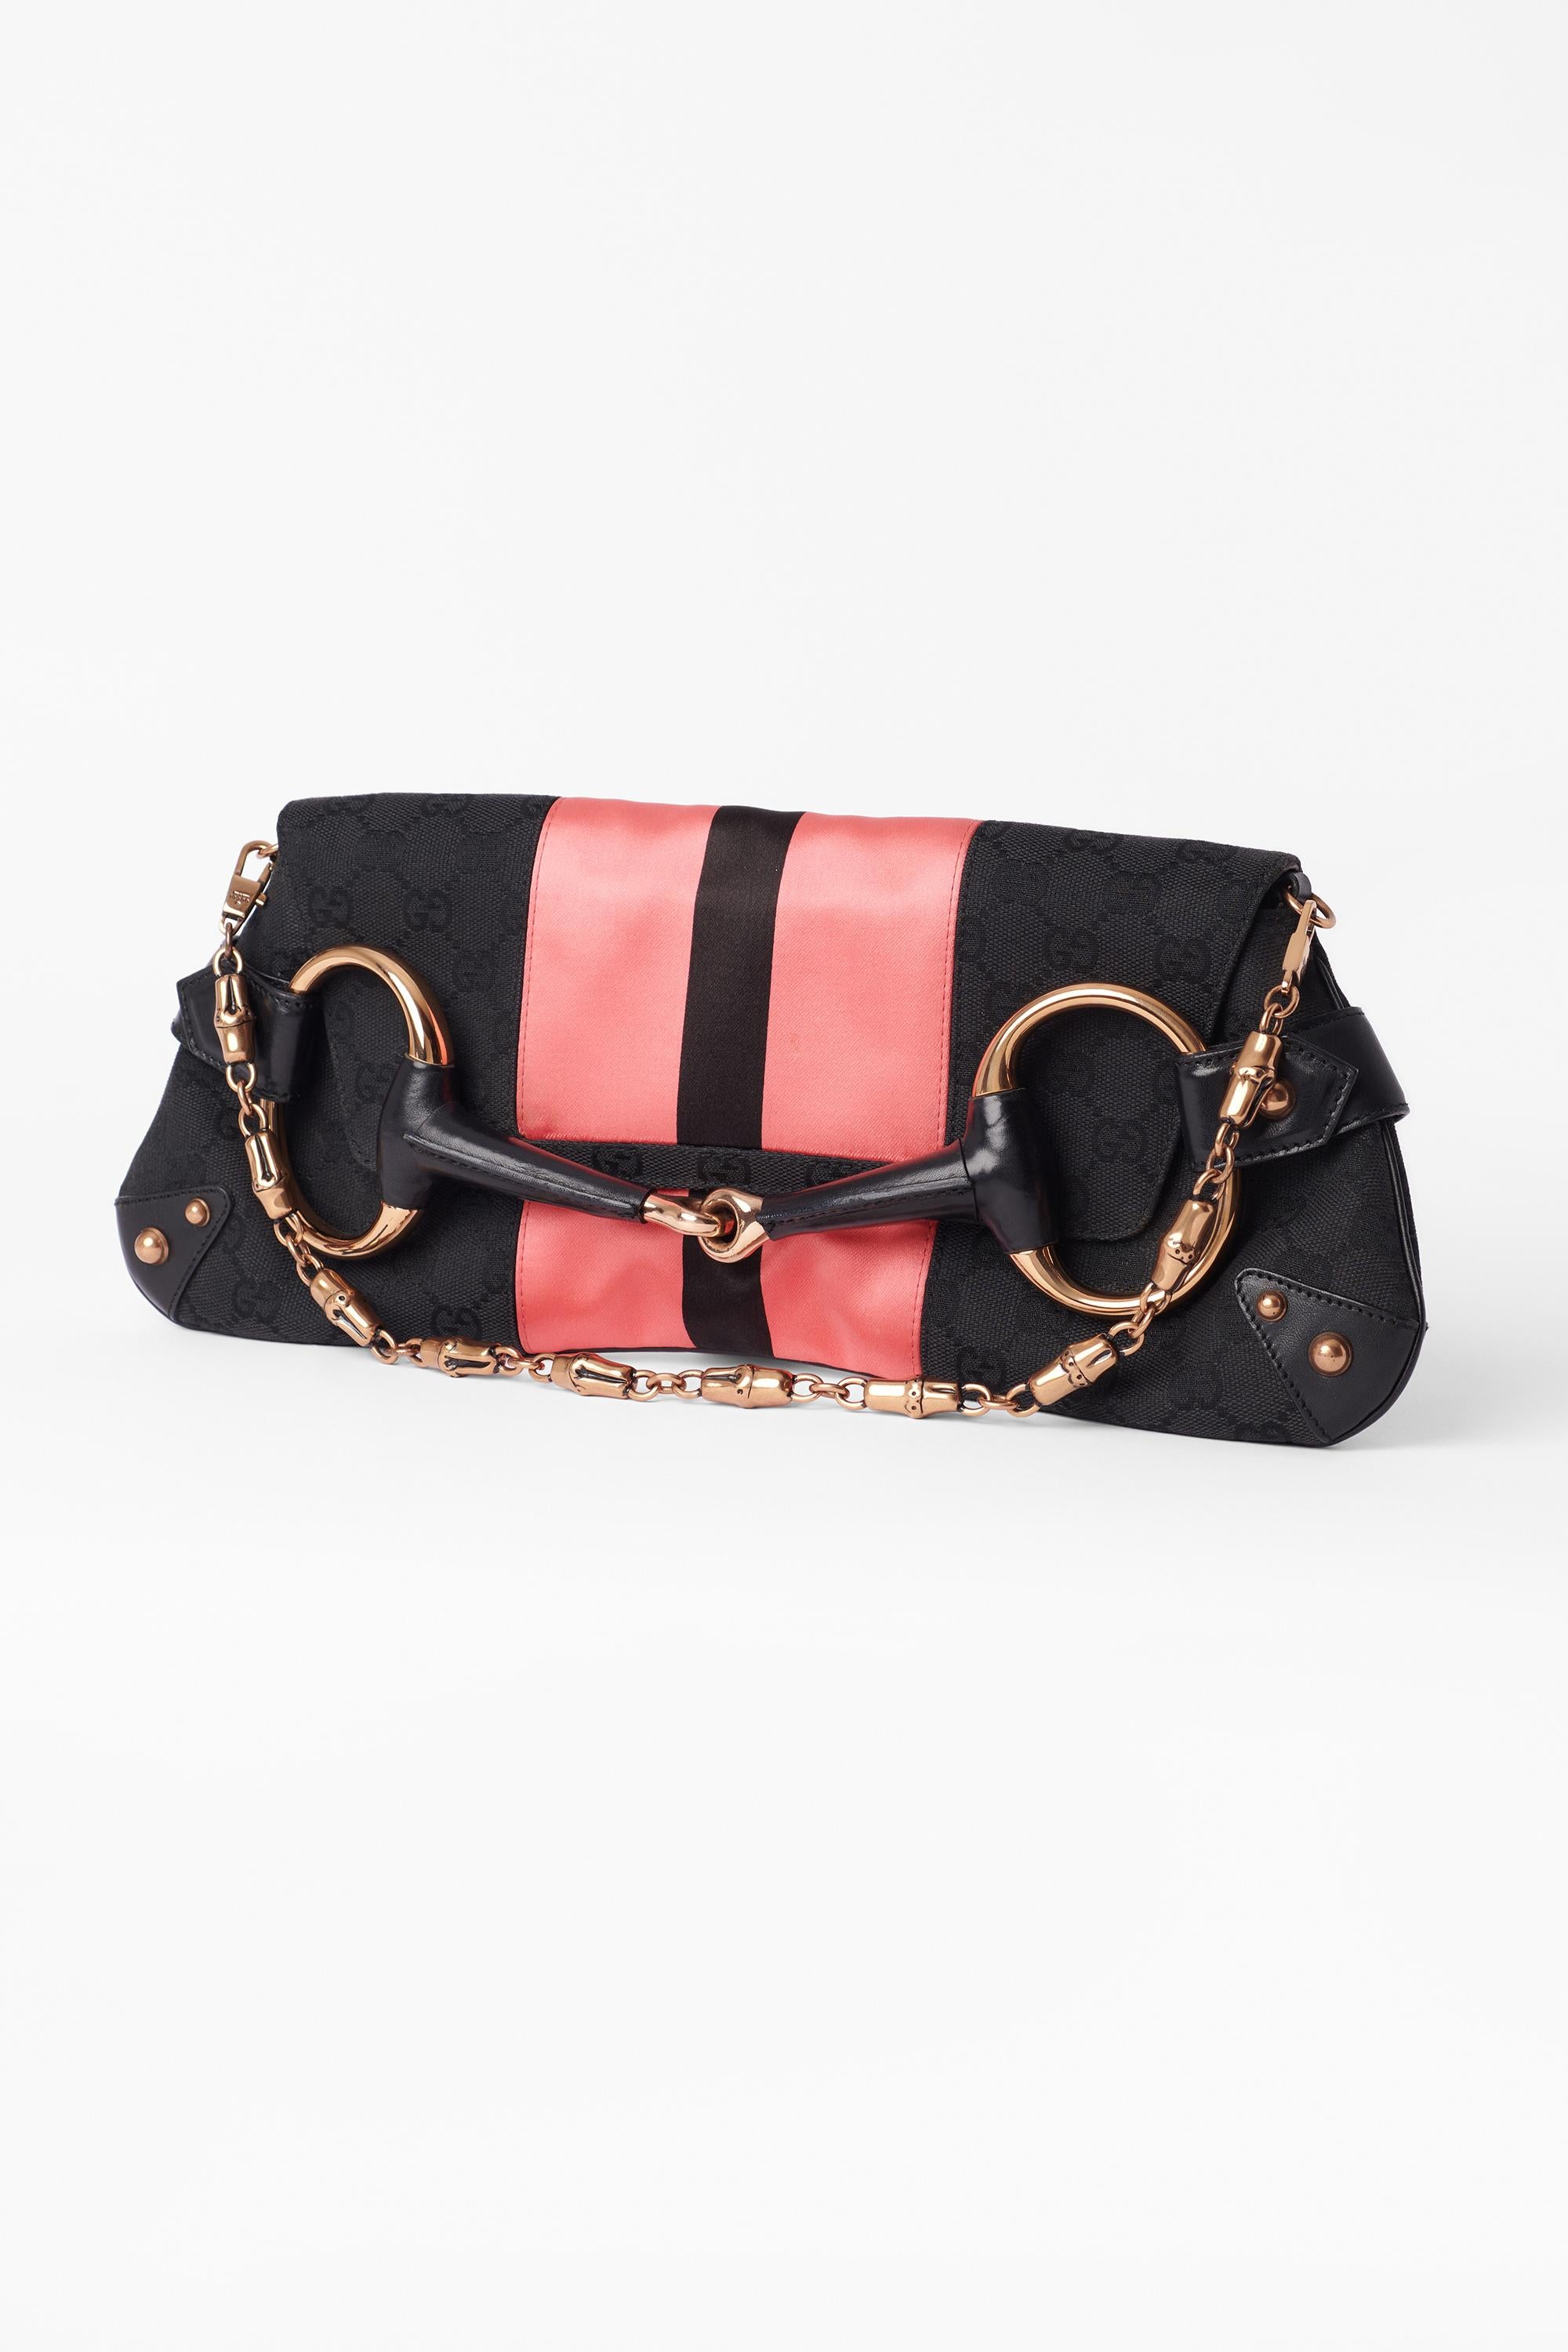 S/S 2004 Runway Black&Pink GG Canvas Horsebit Clutch In Excellent Condition For Sale In London, GB